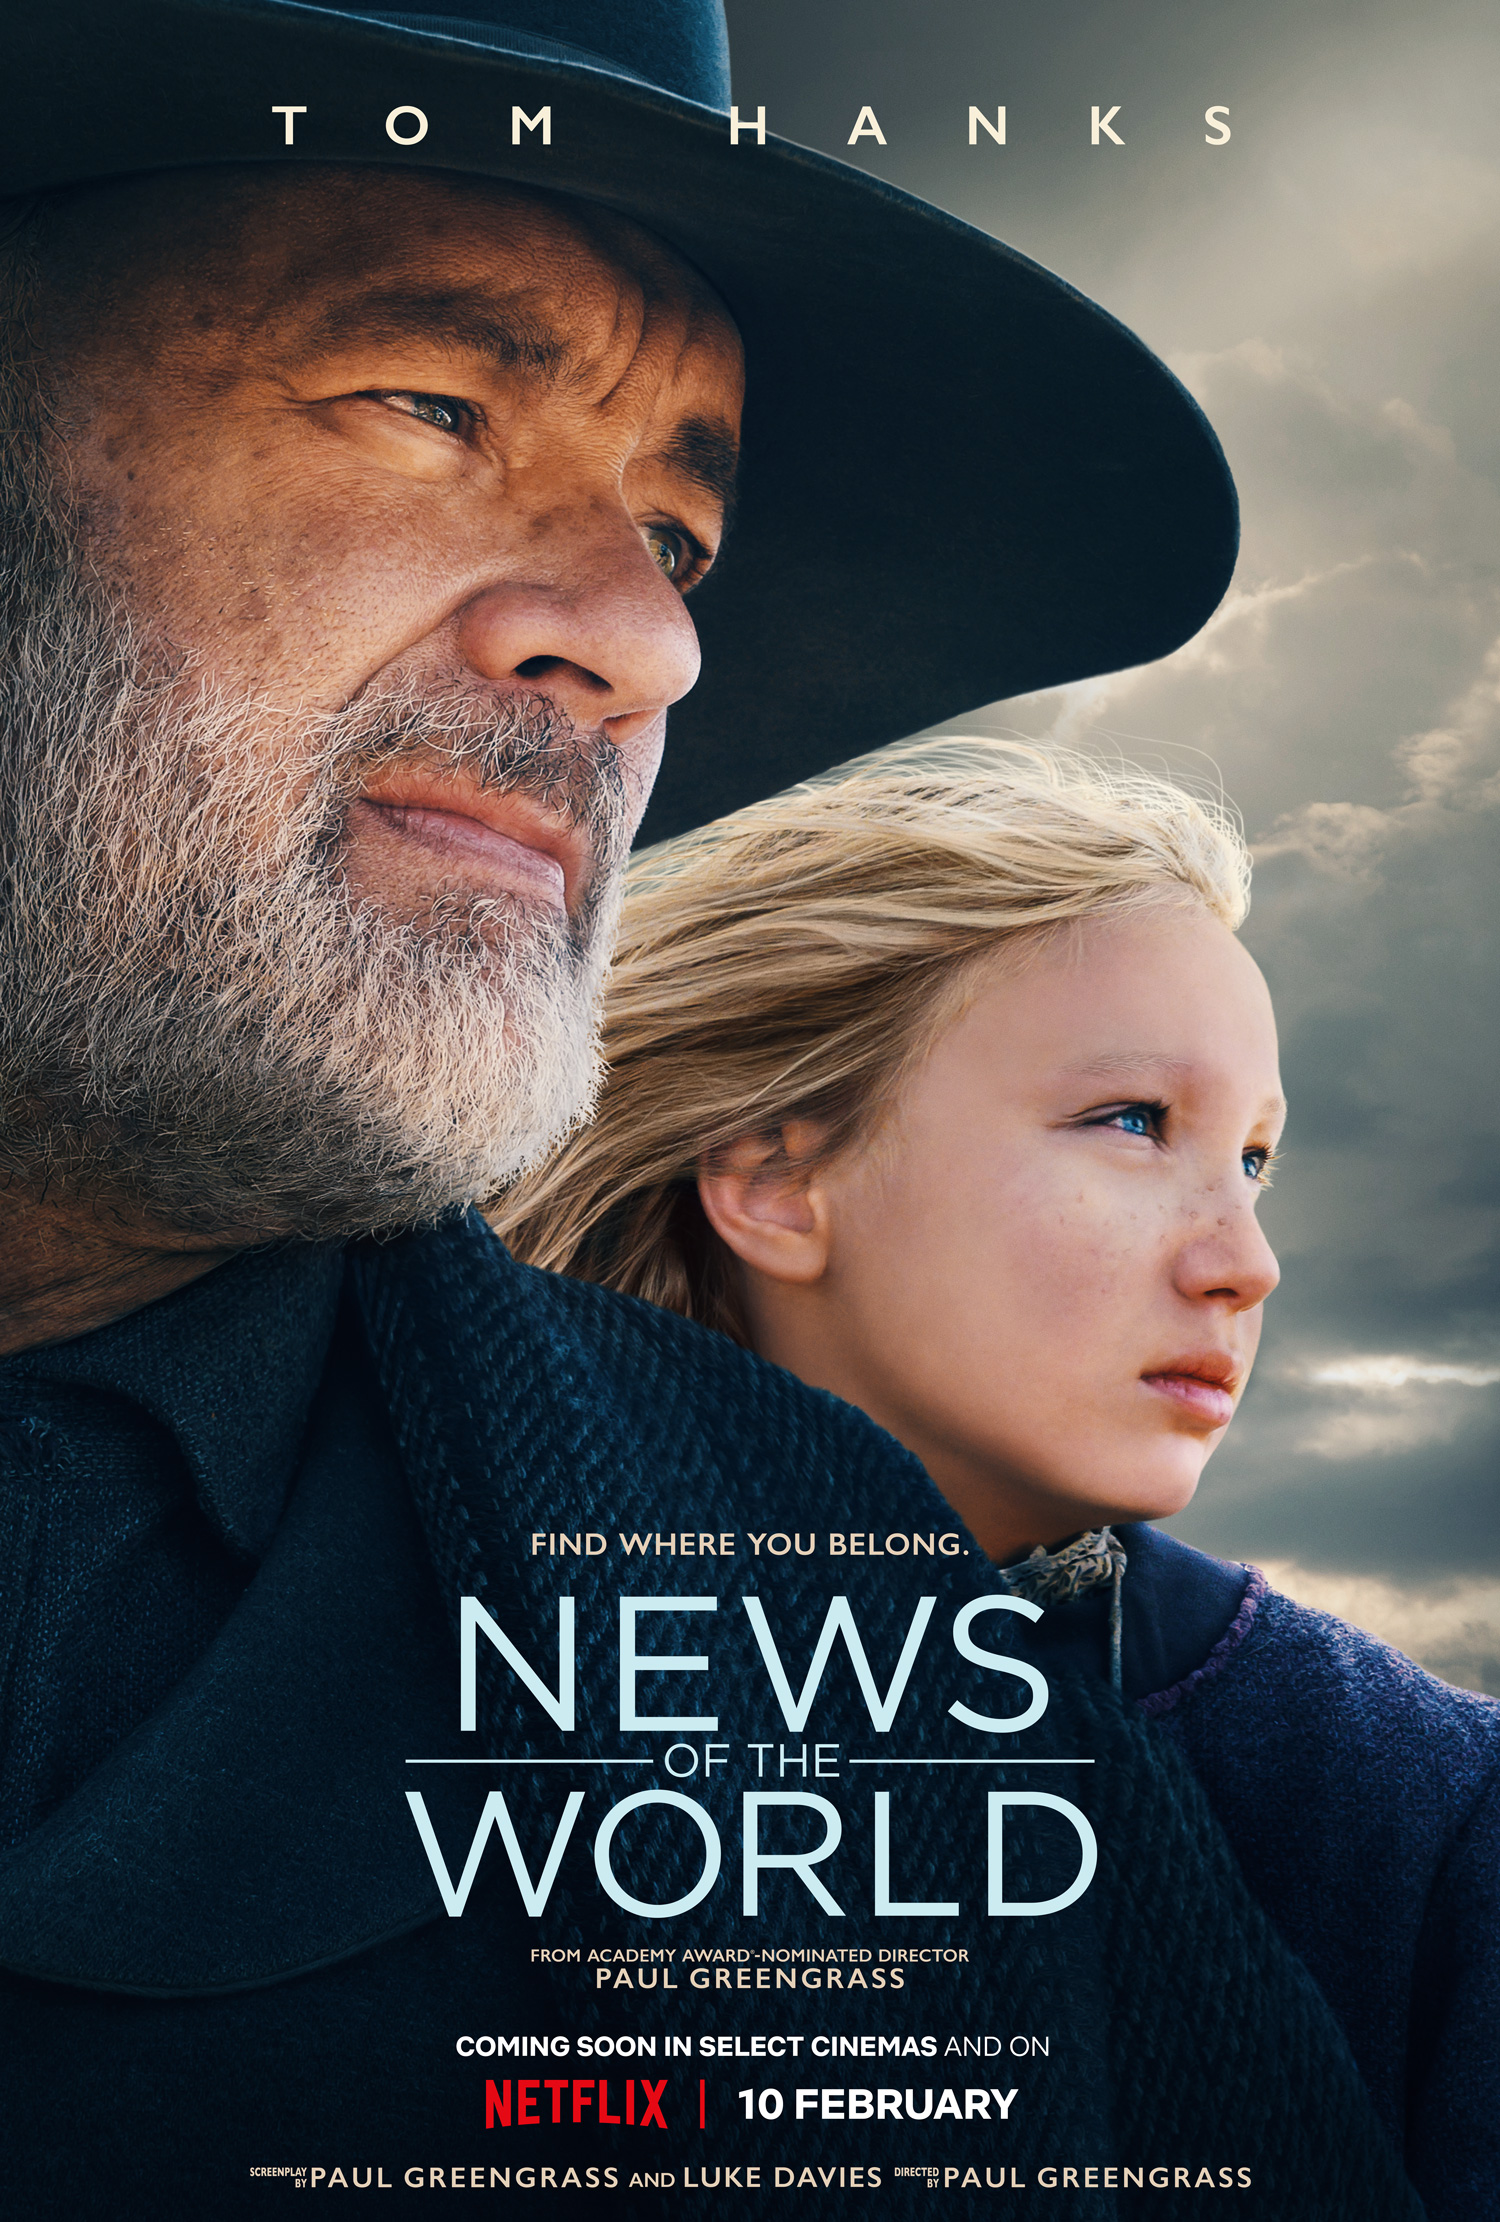 News of the World (2020) ★★★★☆